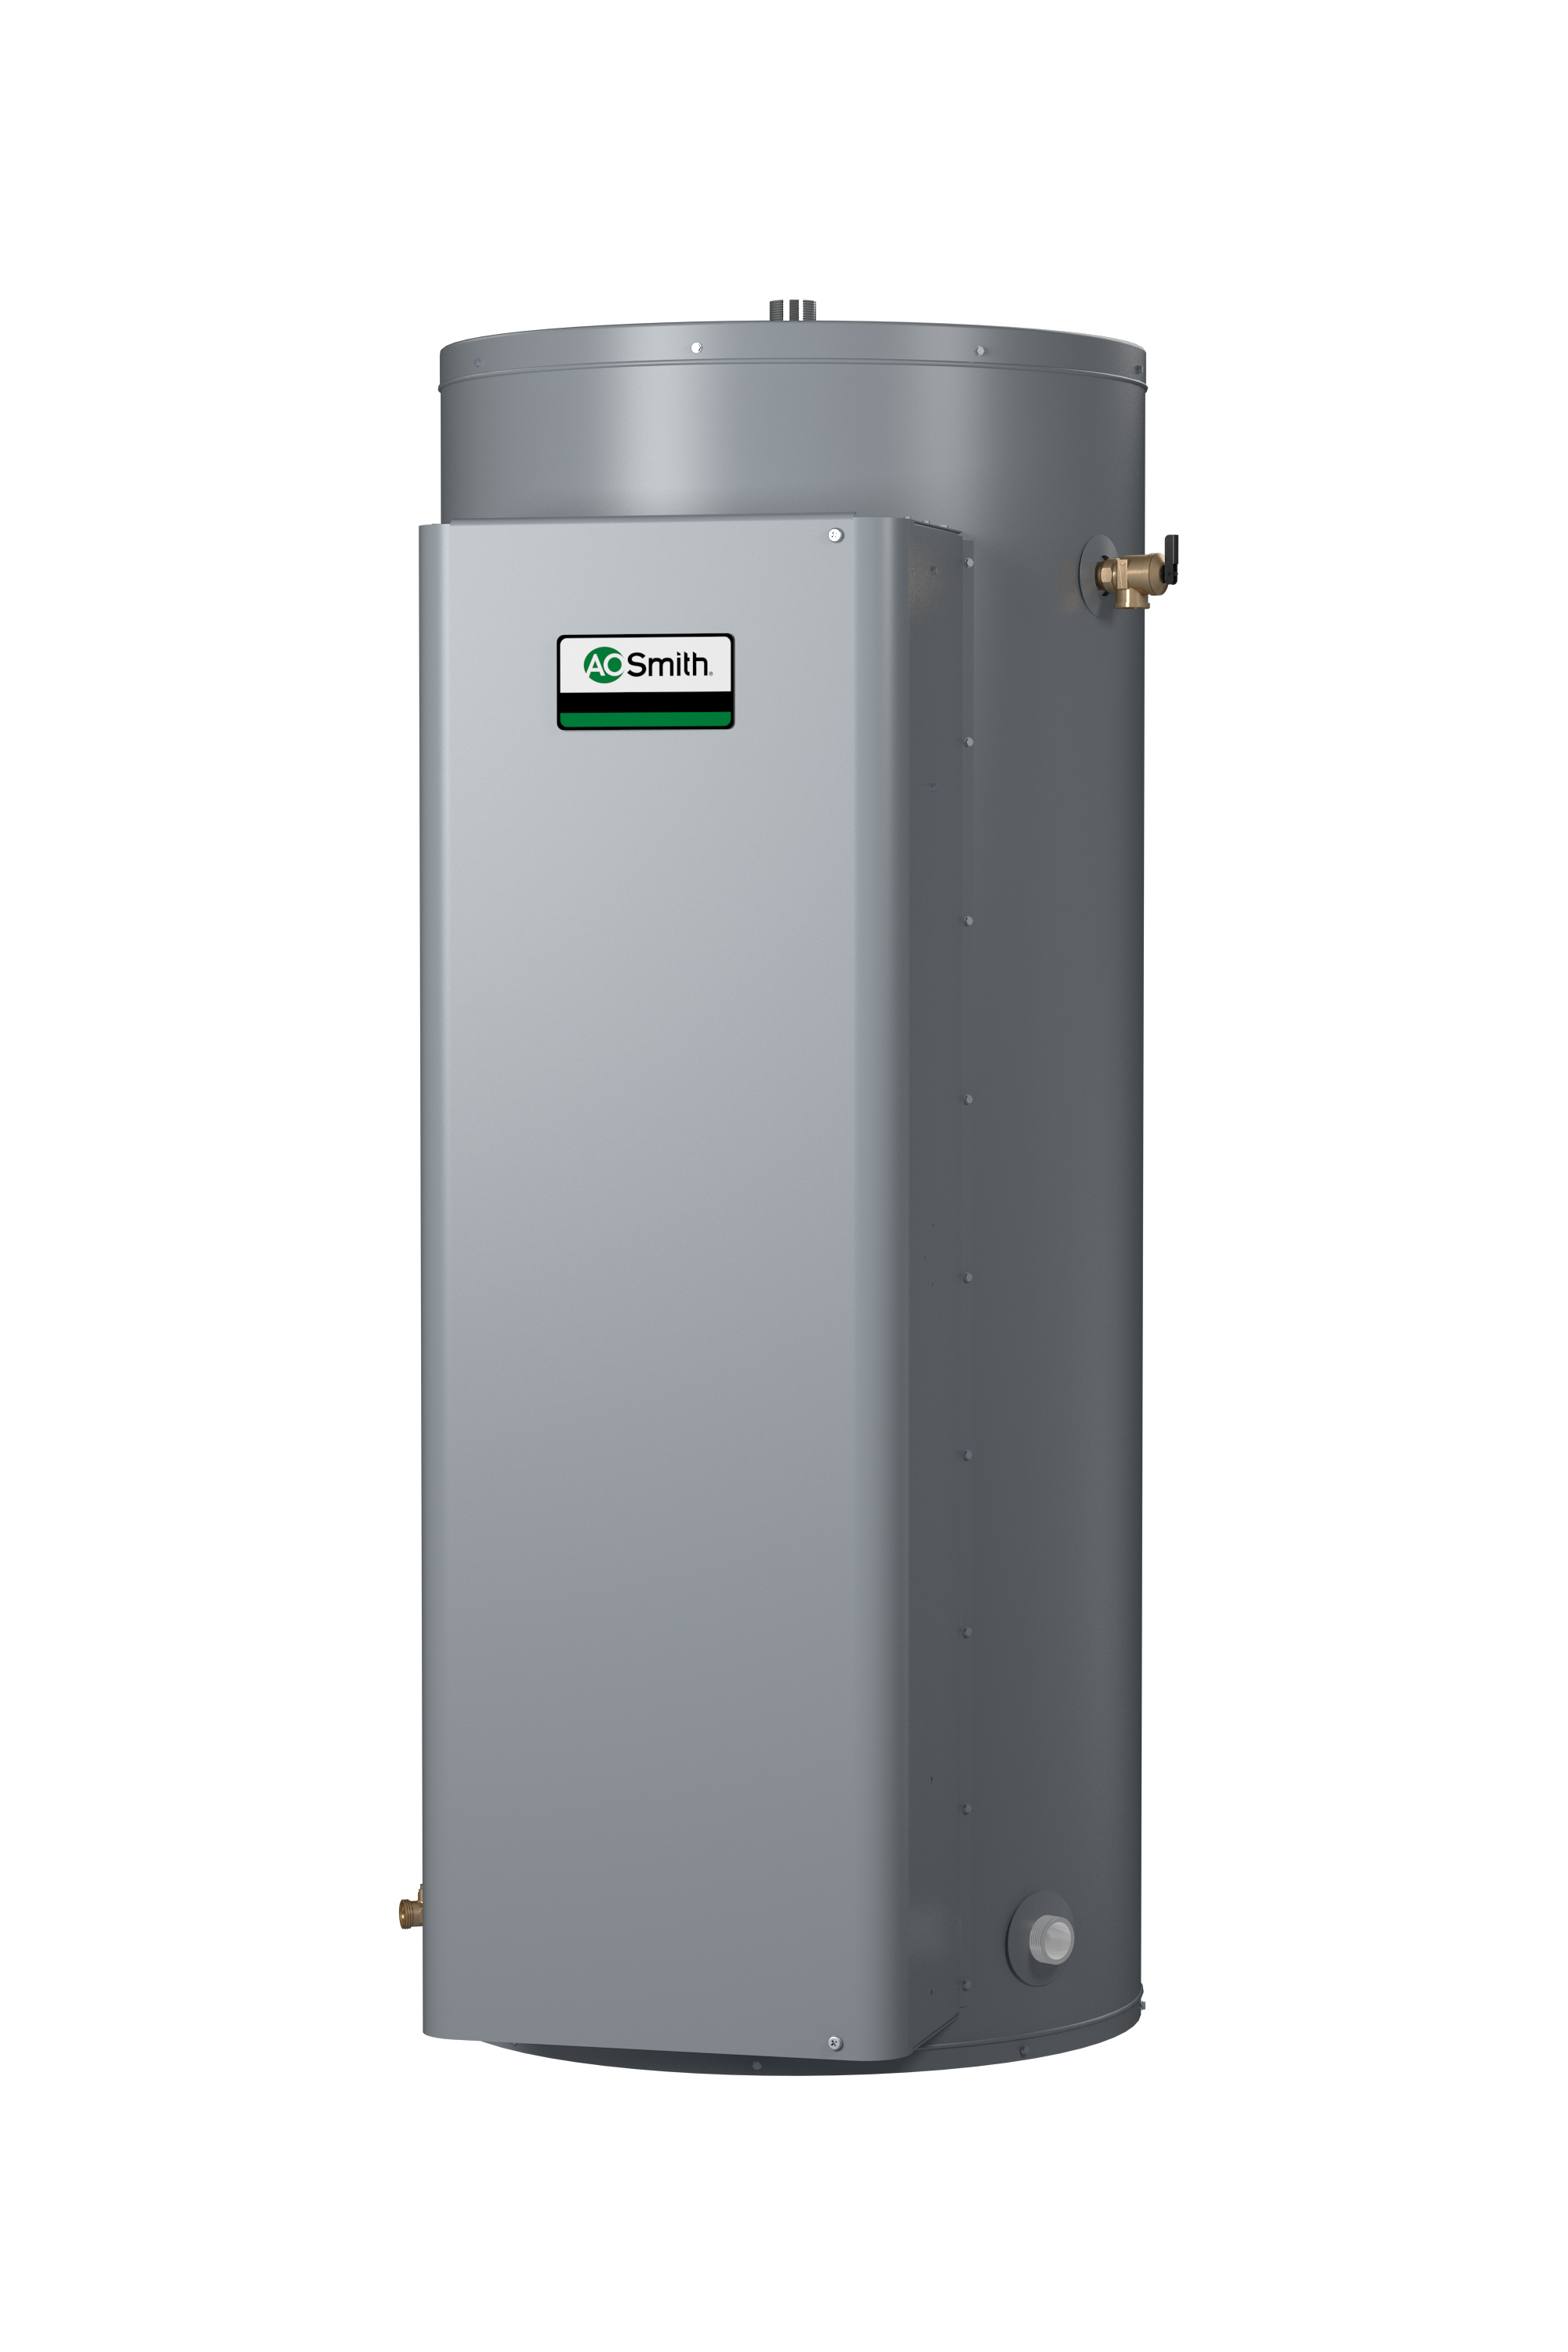 AO SMITH DRE-80-36, 80 GALLONS, 36.0KW, 480 VOLT, 43.3 AMPS, 3 PHASE, 6 ELEMENT, COMMERCIAL ELECTRIC WATER HEATER, GOLD SERIES